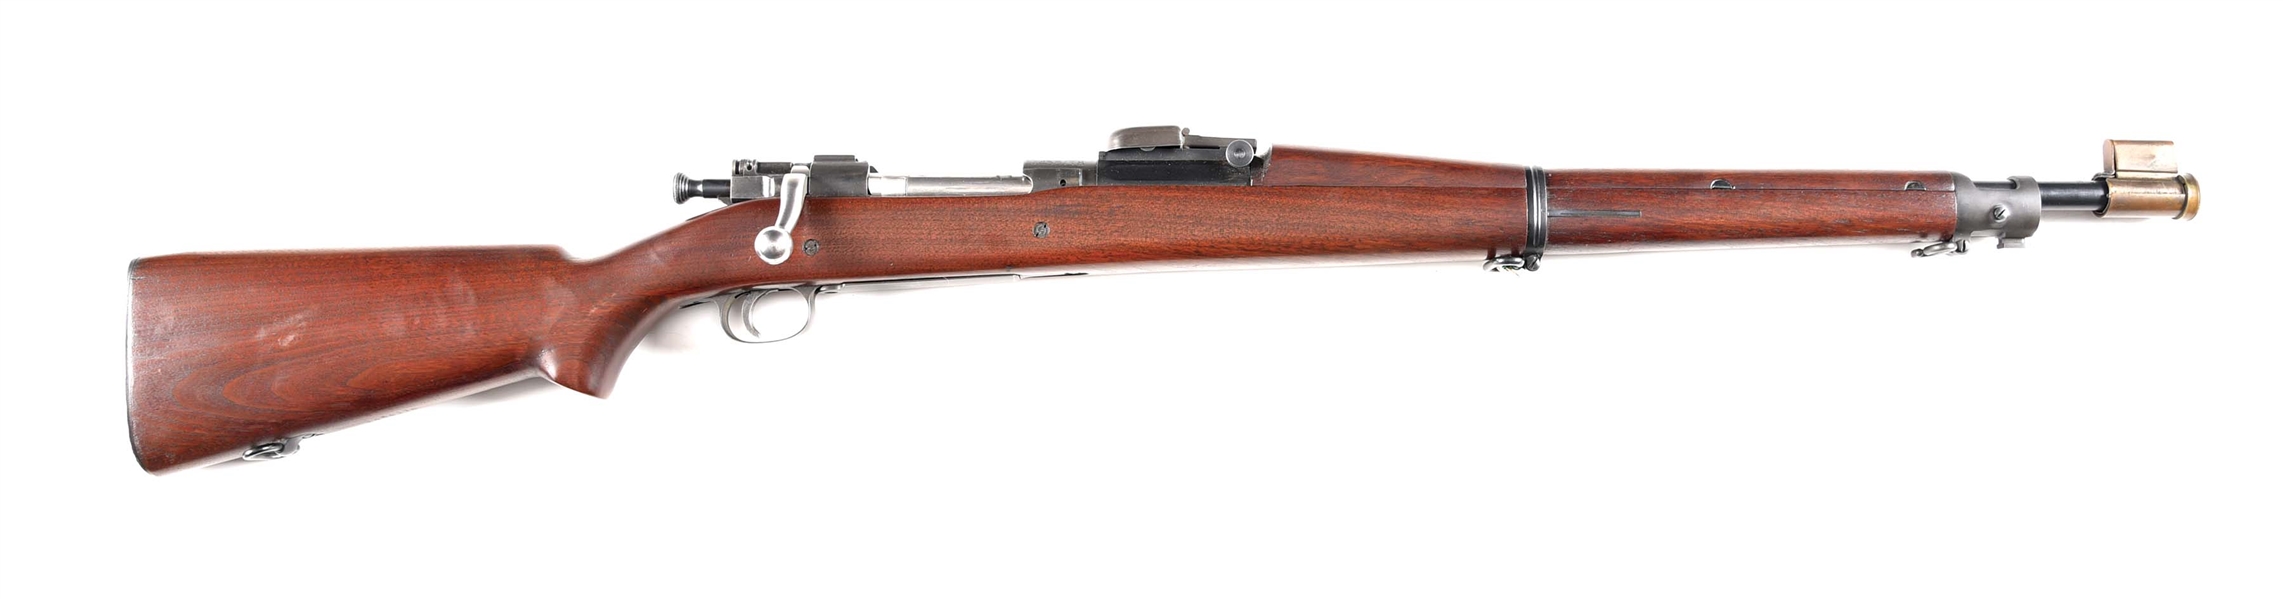 (C) US SPRINGFIELD MODEL 1903 A1 NATIONAL MATCH BOLT ACTION RIFLE.